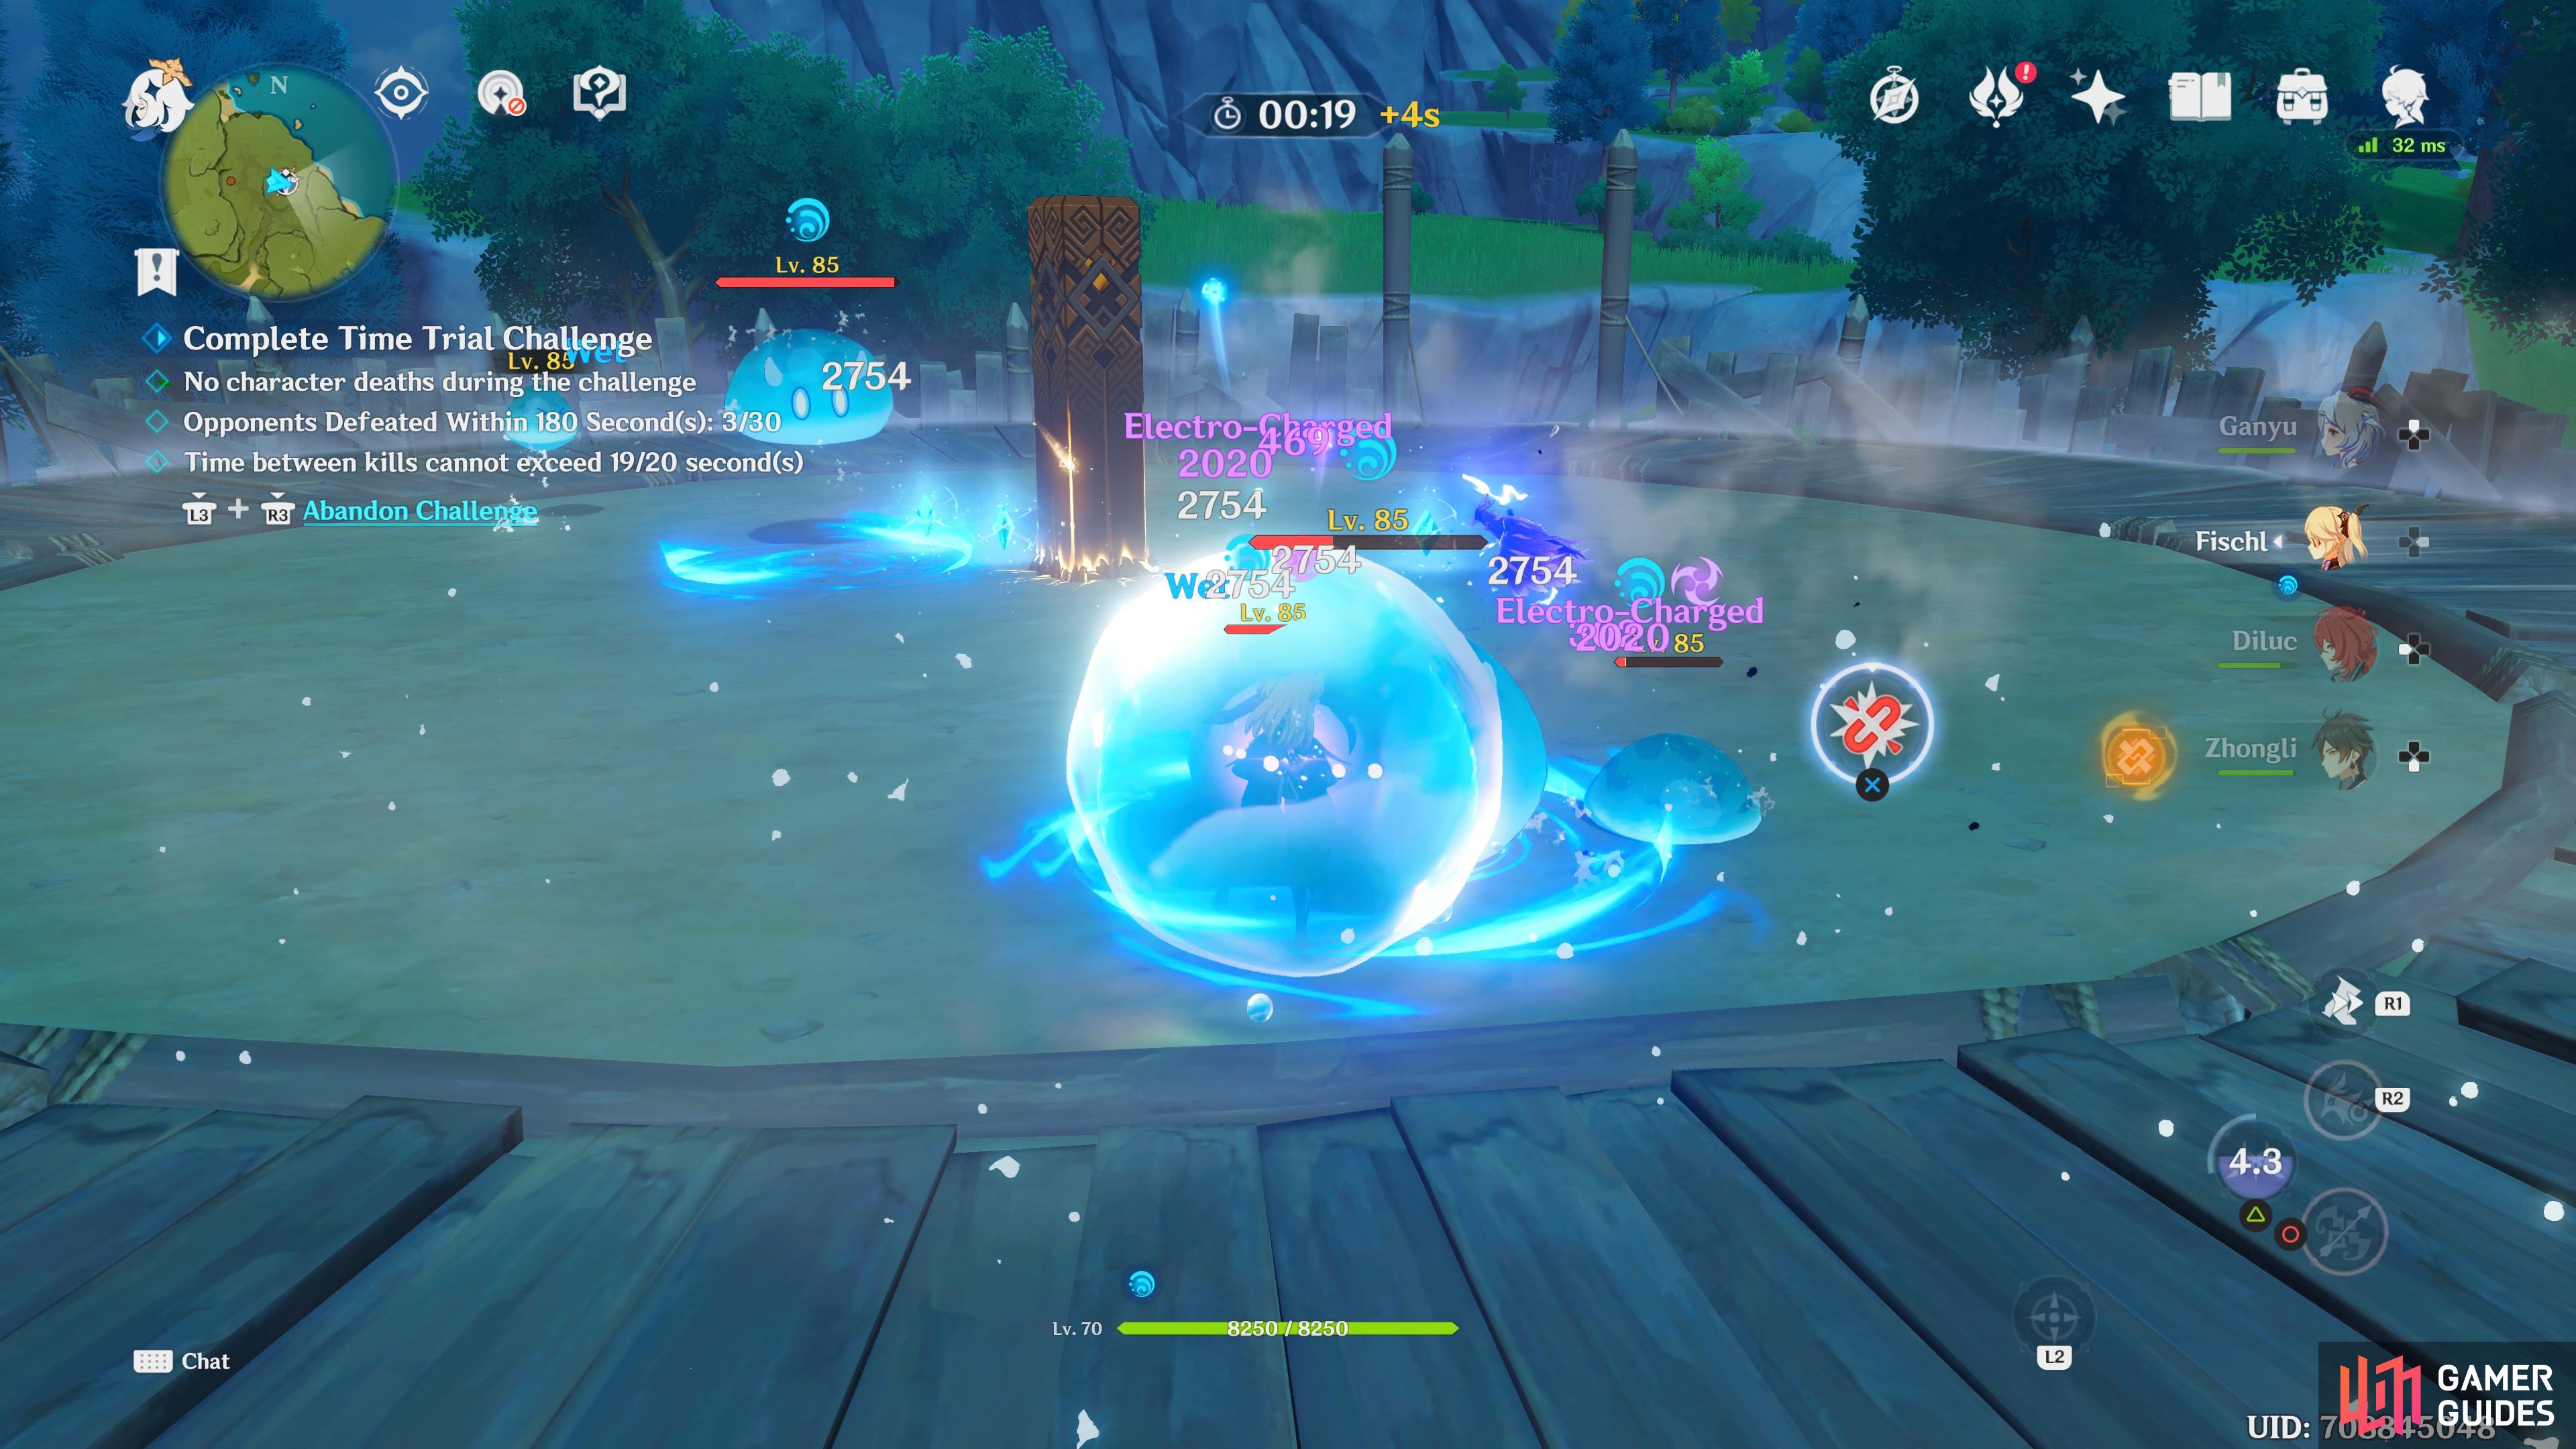 Make sure the enemies are constantly getting hit by Electro, so you can exploit the Arena Effect.